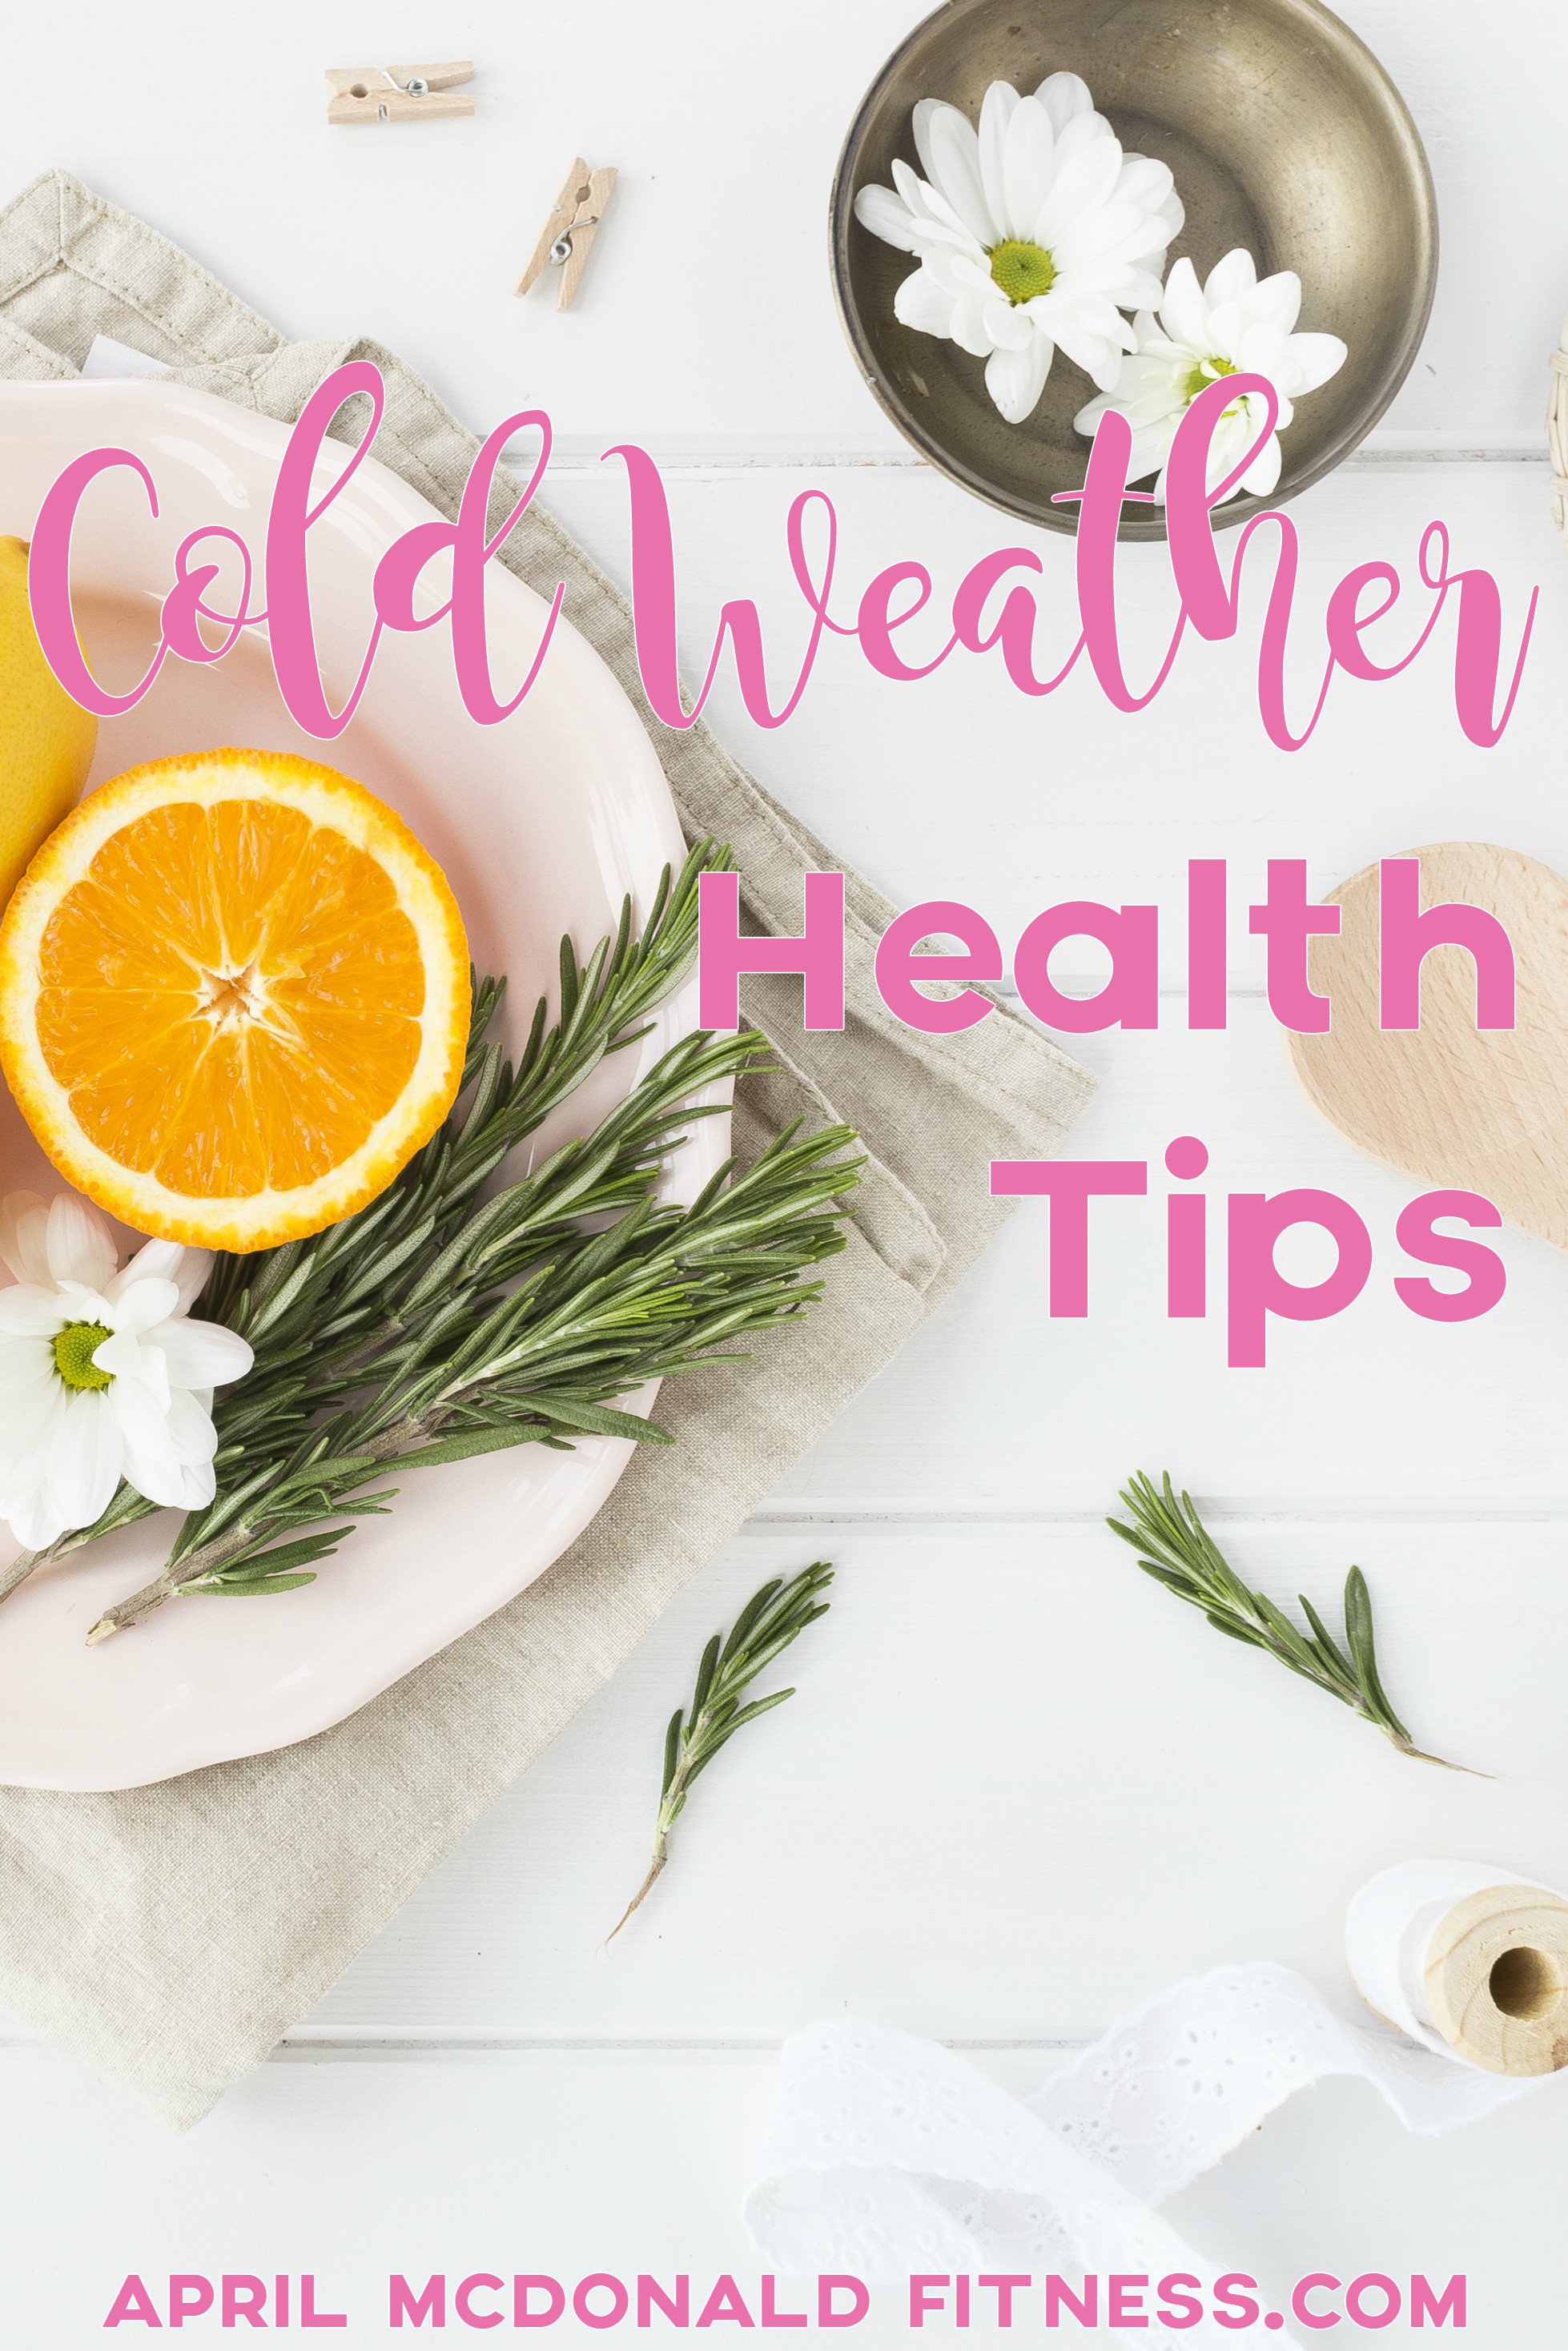 Winter is now in full force. No matter where you live, it is definitely the colder months. Which also means it is cold and flu season. But, just because it is winter doesn't mean you have to get sick or forget your health tips. It is actually more important during these months to follow through with being healthy and focusing on your immune system. 